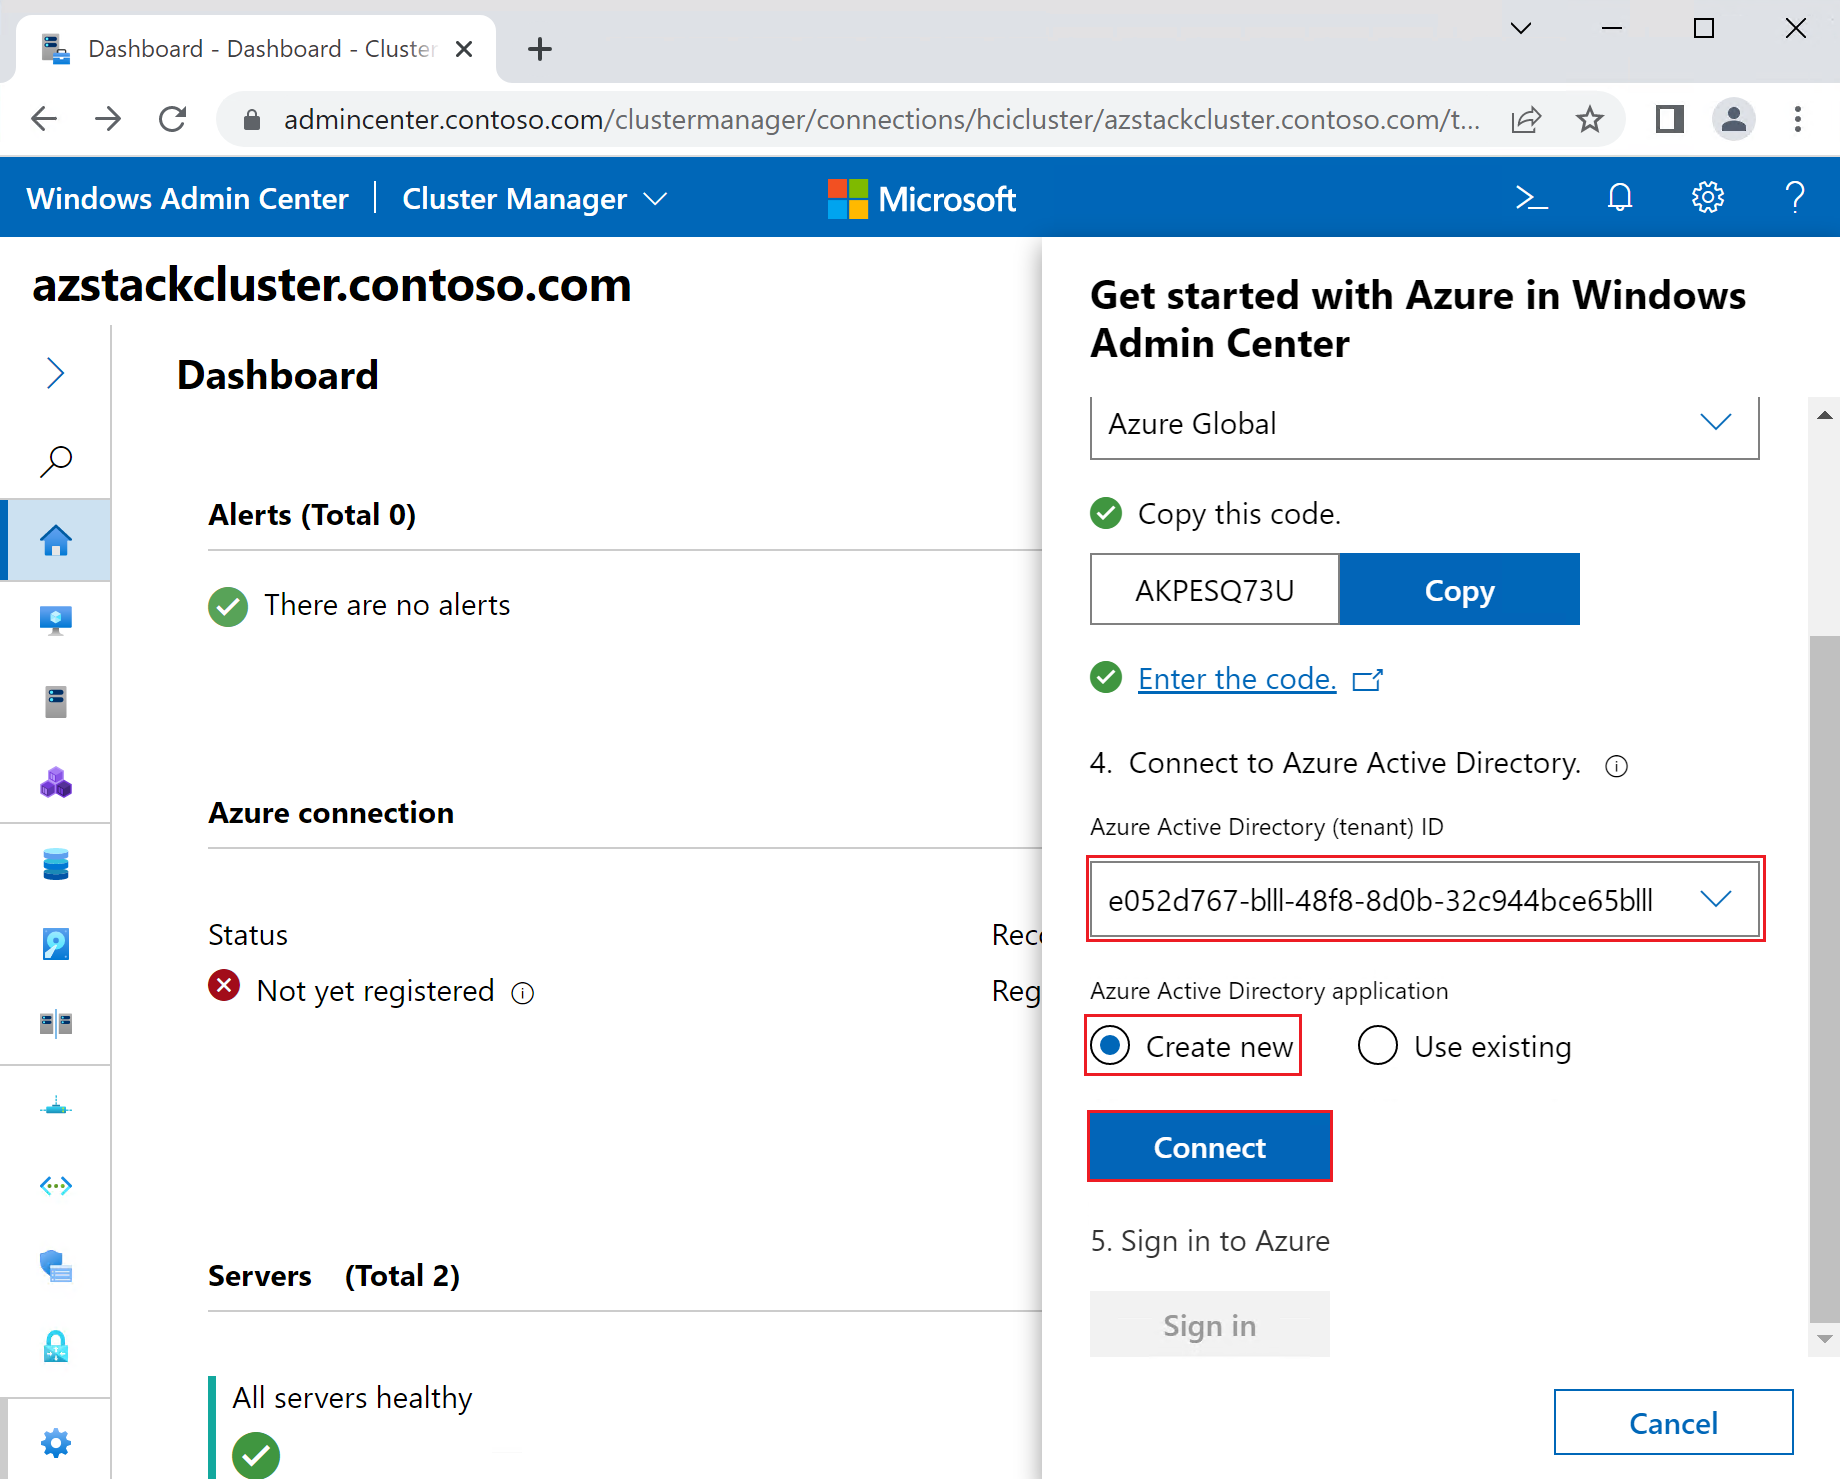 Create service princpals in the Microsoft Entra tenant